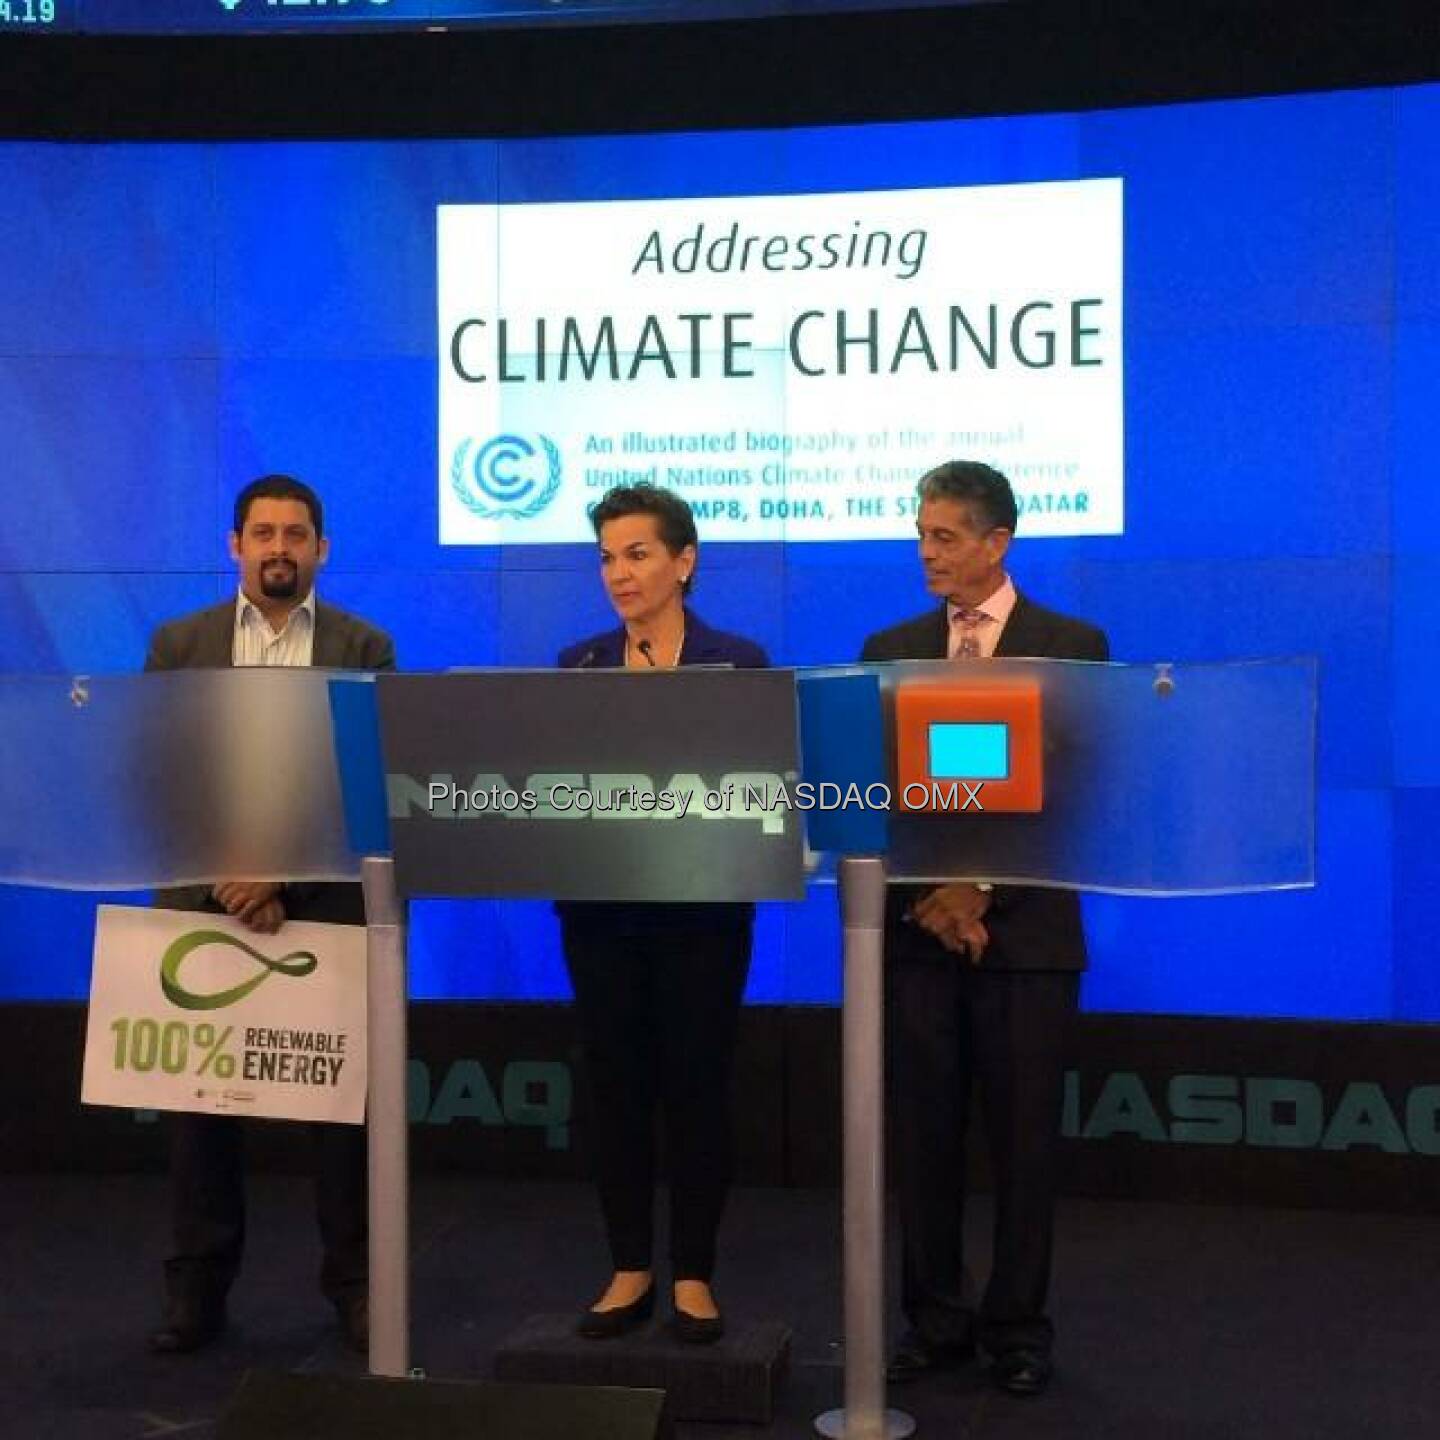 Christiana Figueres speaks about Climate Change before the #NASDAQ Opening Bell! @CFigueres @UNClimateBook #AddressClimateChange #climateweek  Source: http://facebook.com/NASDAQ